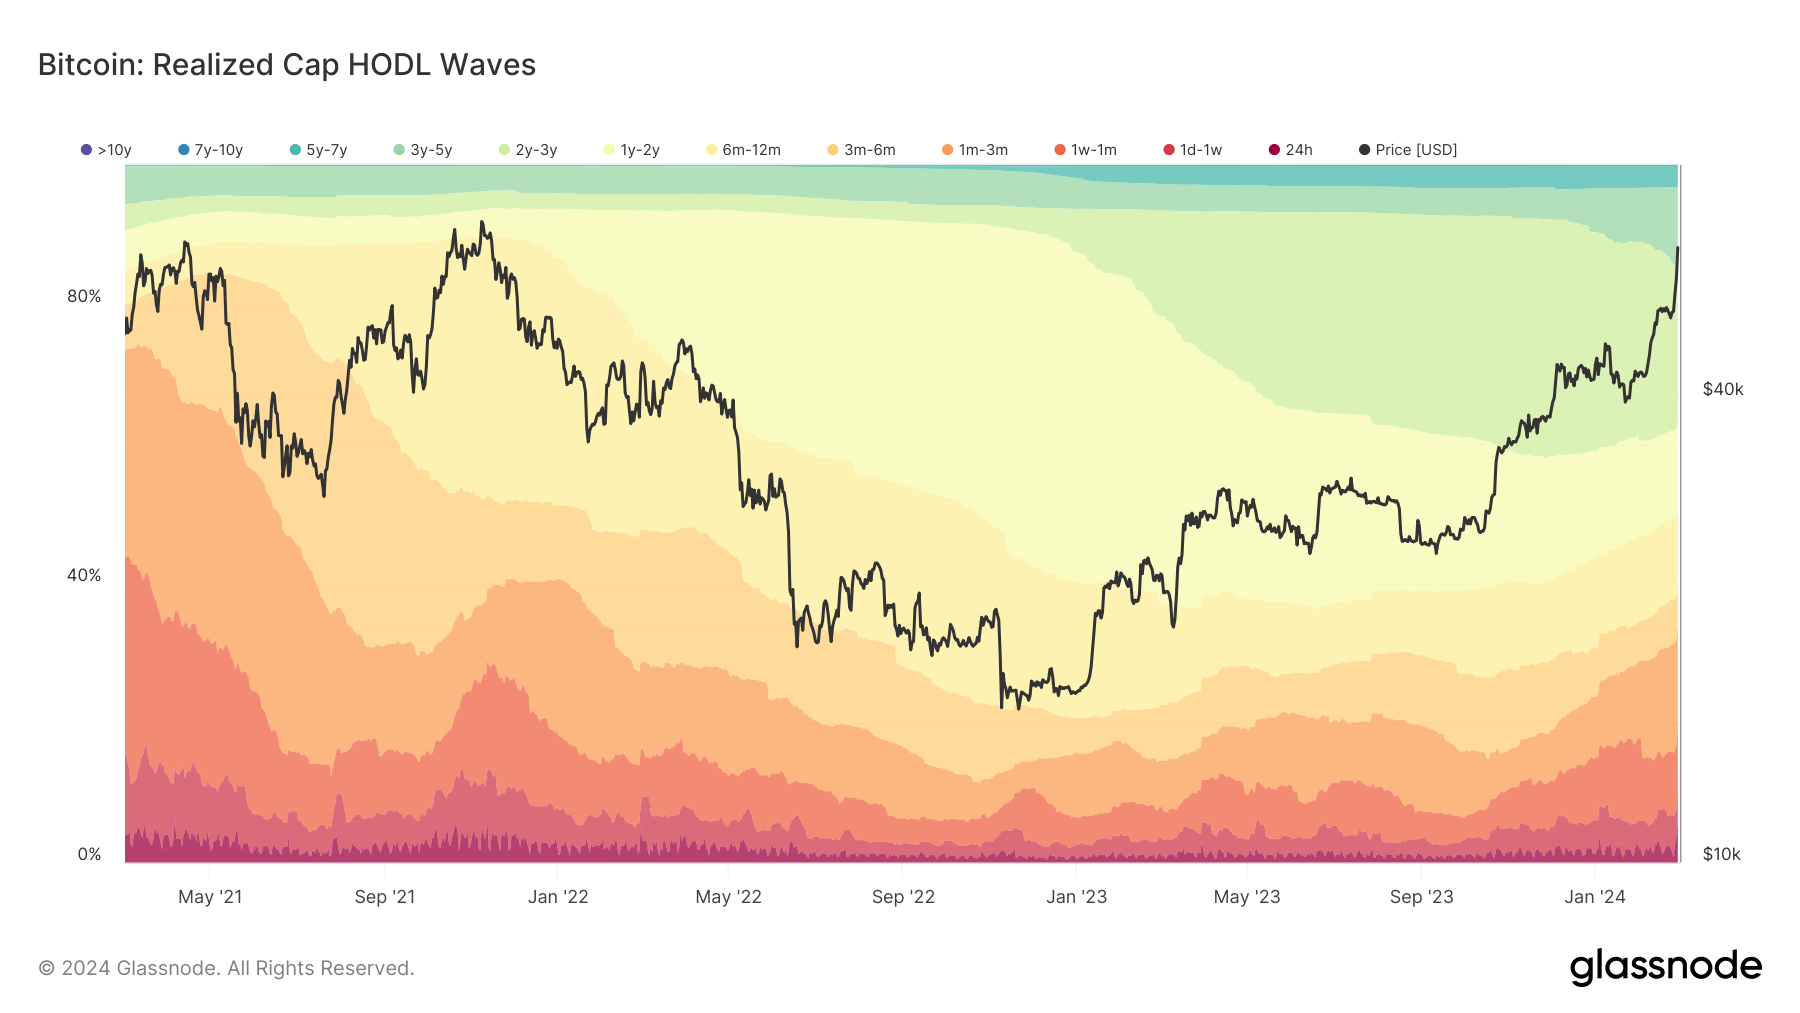 realized cap HODL waves 3y